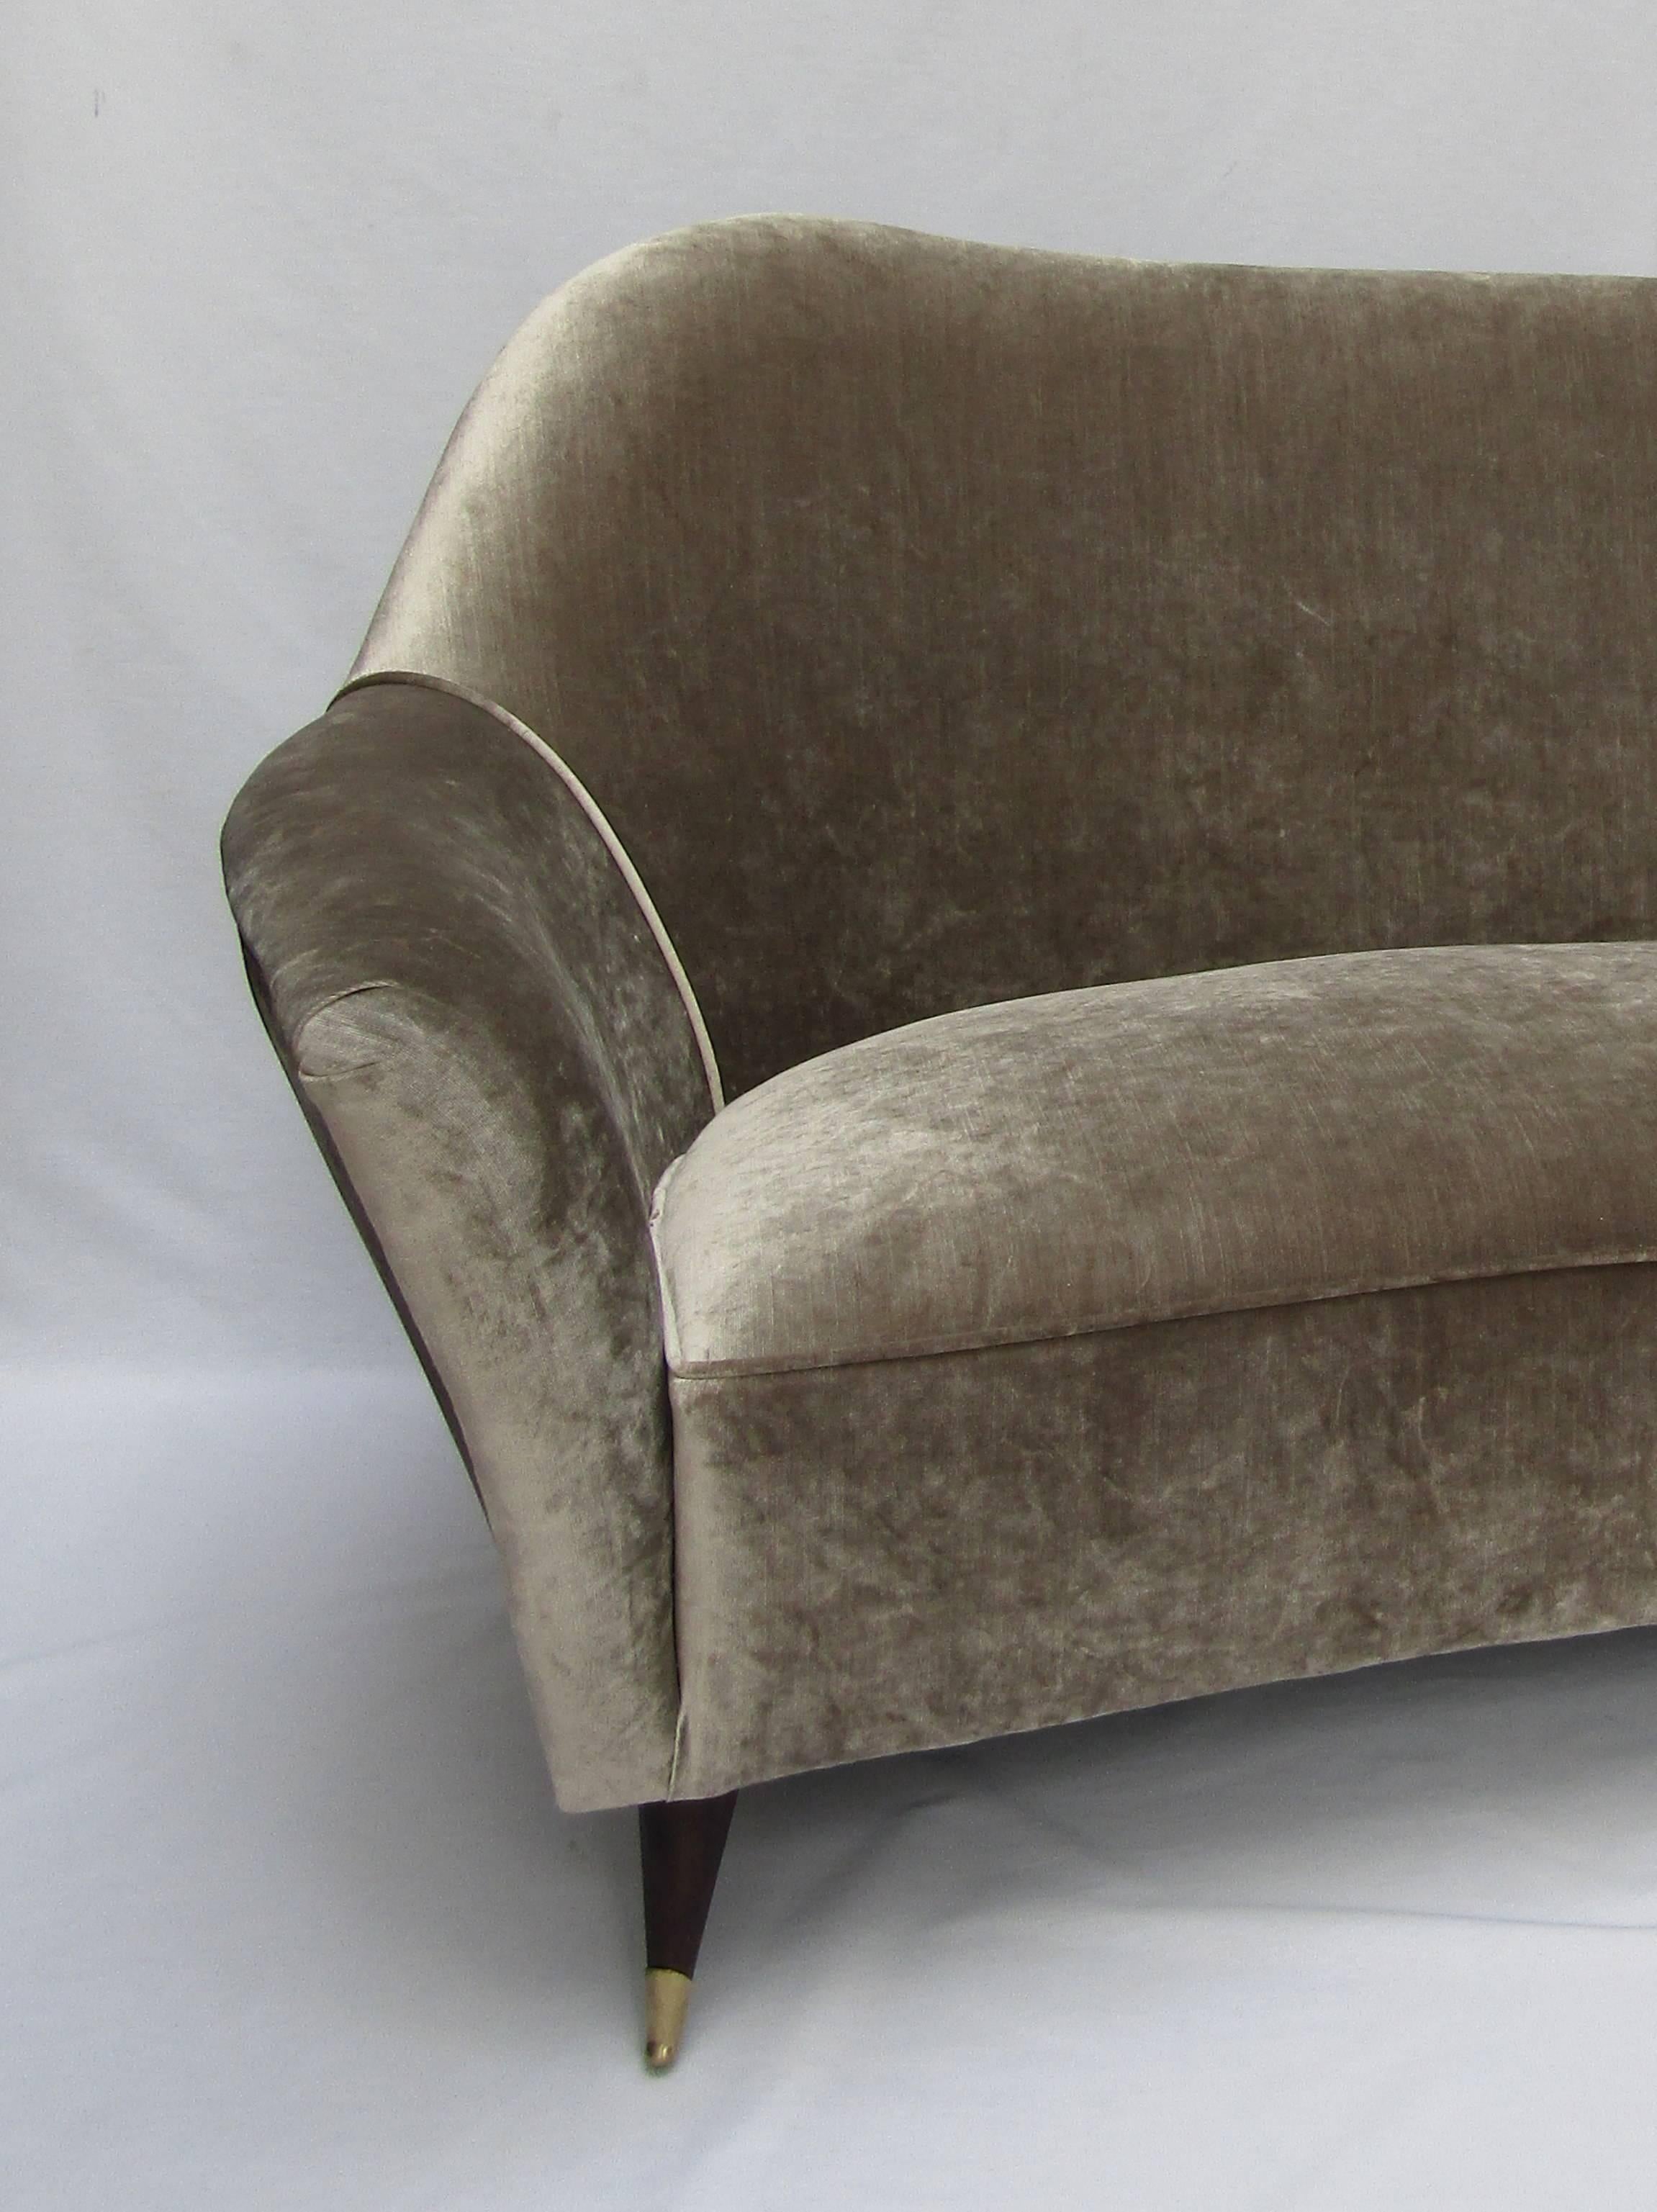 A large curved three-seat sofa with wooden legs and brass sabots
Upholstered in designers Guild Glenville velvet color 'Pebble'
Vintage cushions sold separately.

Measures: Height 35 in / 89 cm
Width 83 in / 211 cm
Depth 34 in / 86 cm.
 